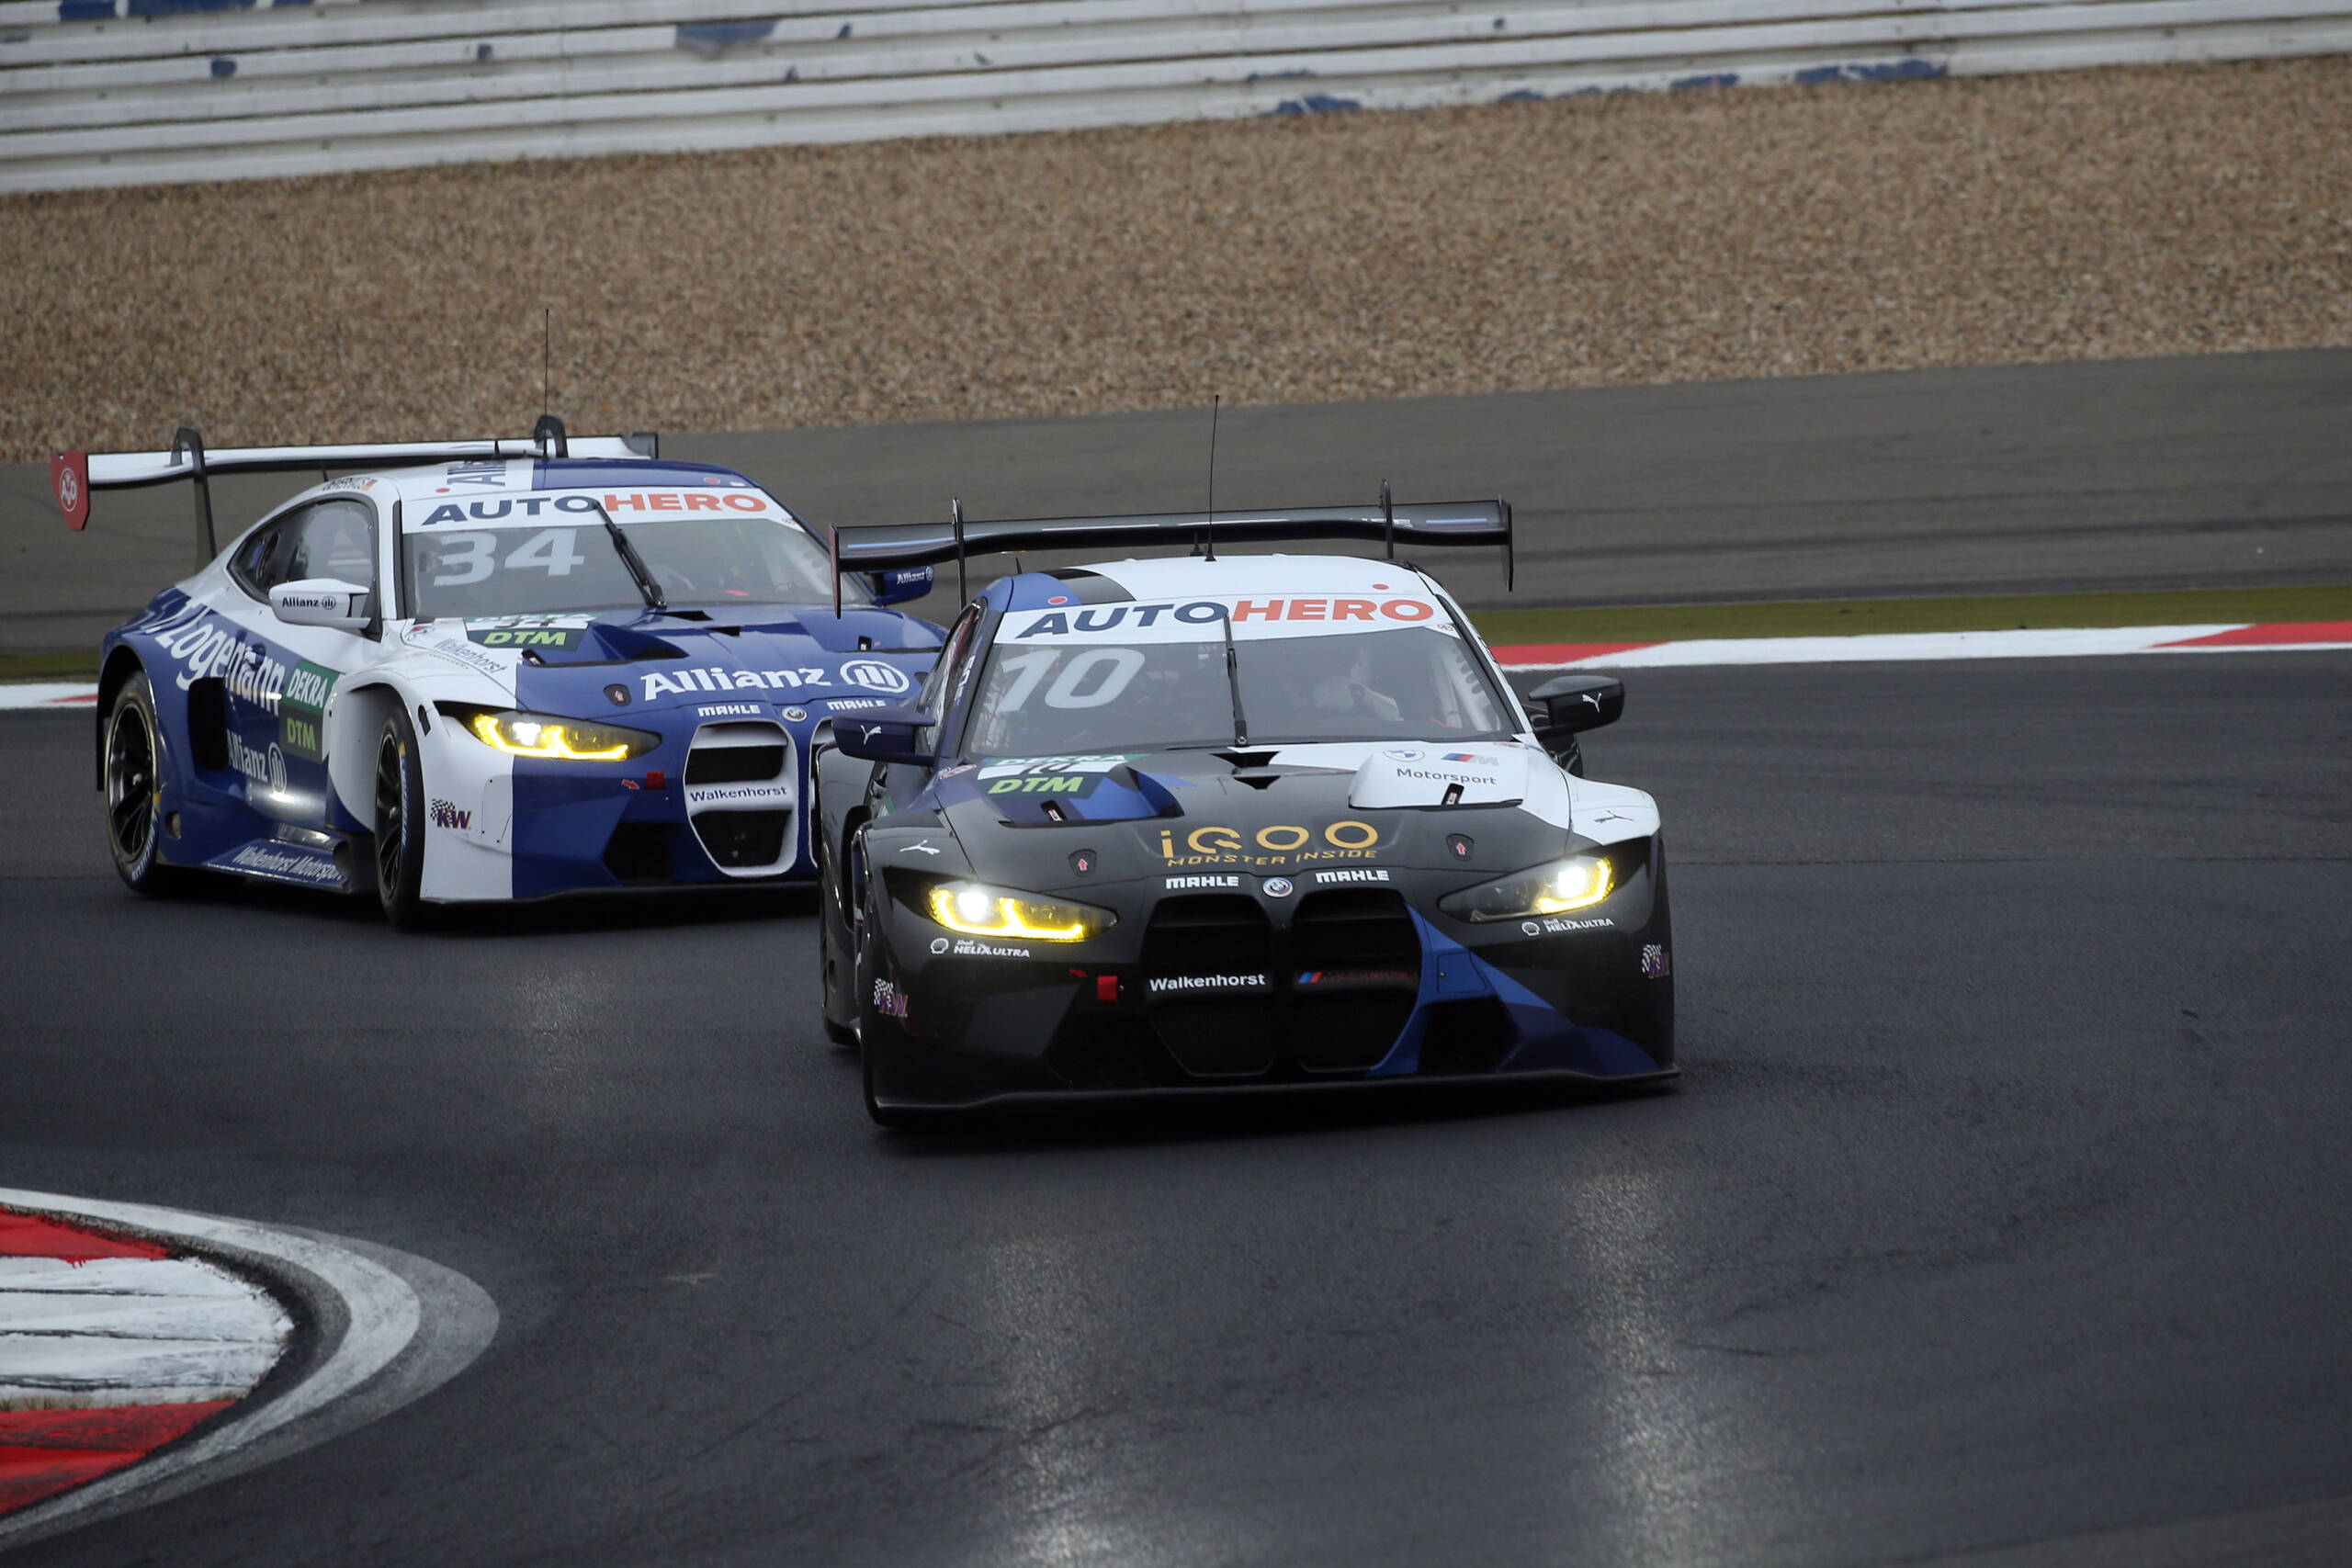 Sheldon van der Linde wins Saturday’s race at the Nürburgring to return to the top of the drivers’ standings.